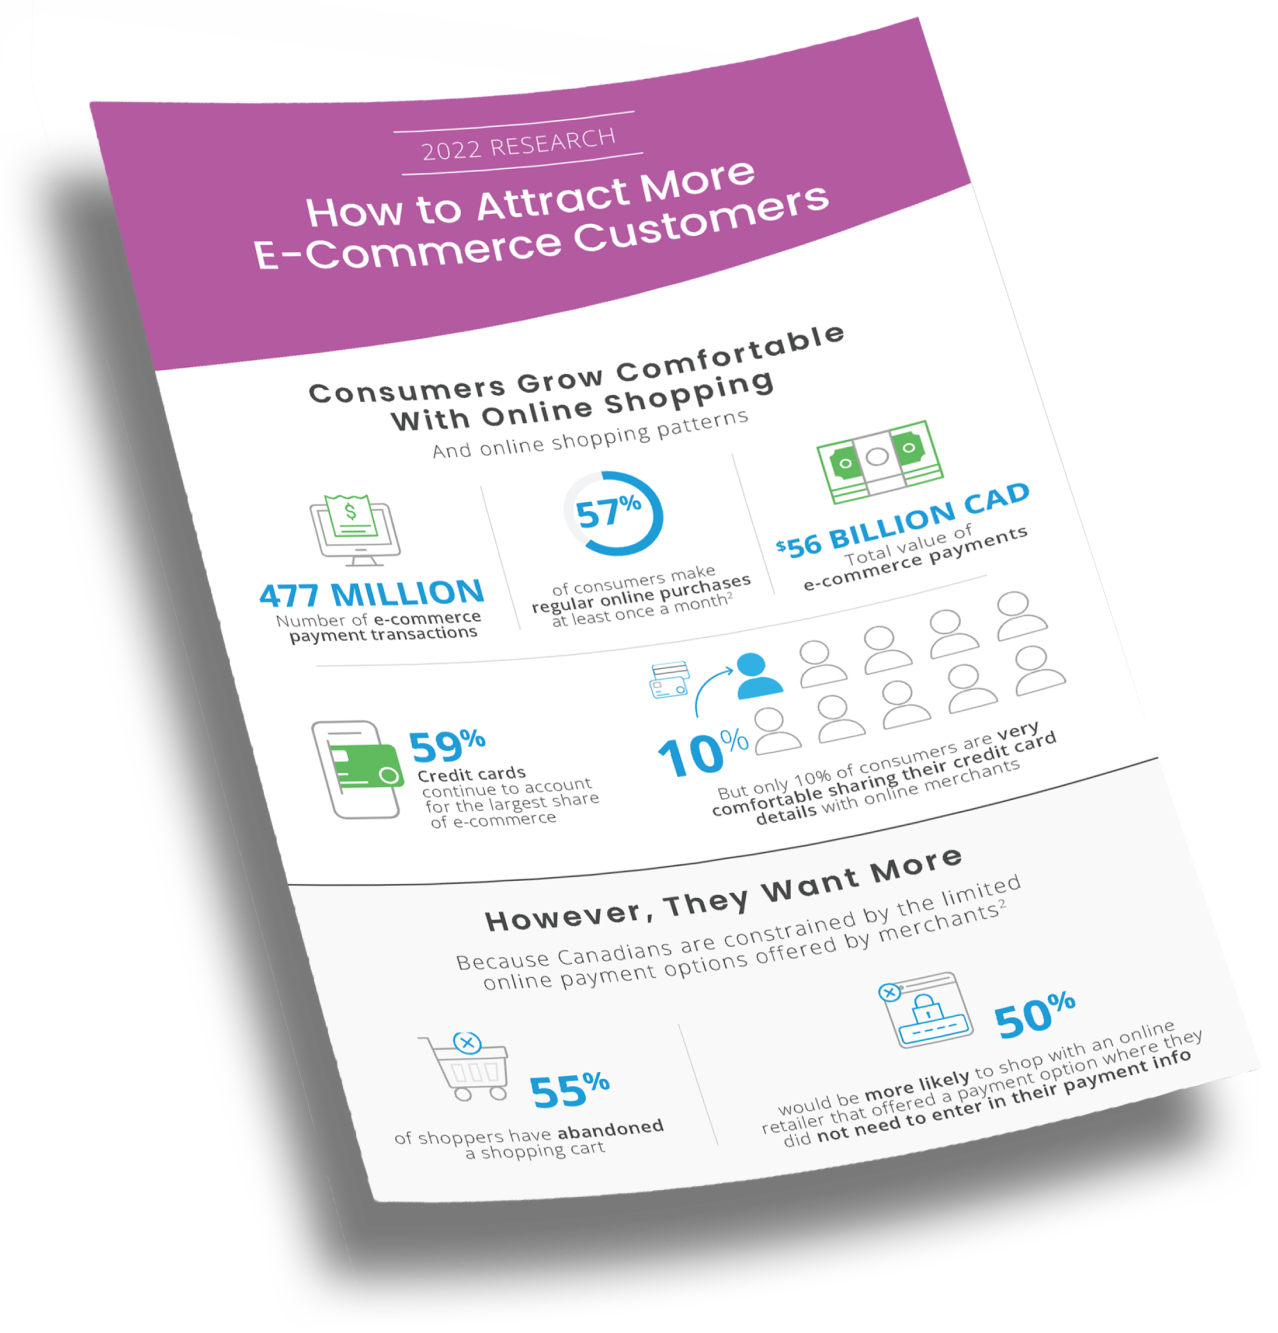 How to attract more e-commerce customers guide